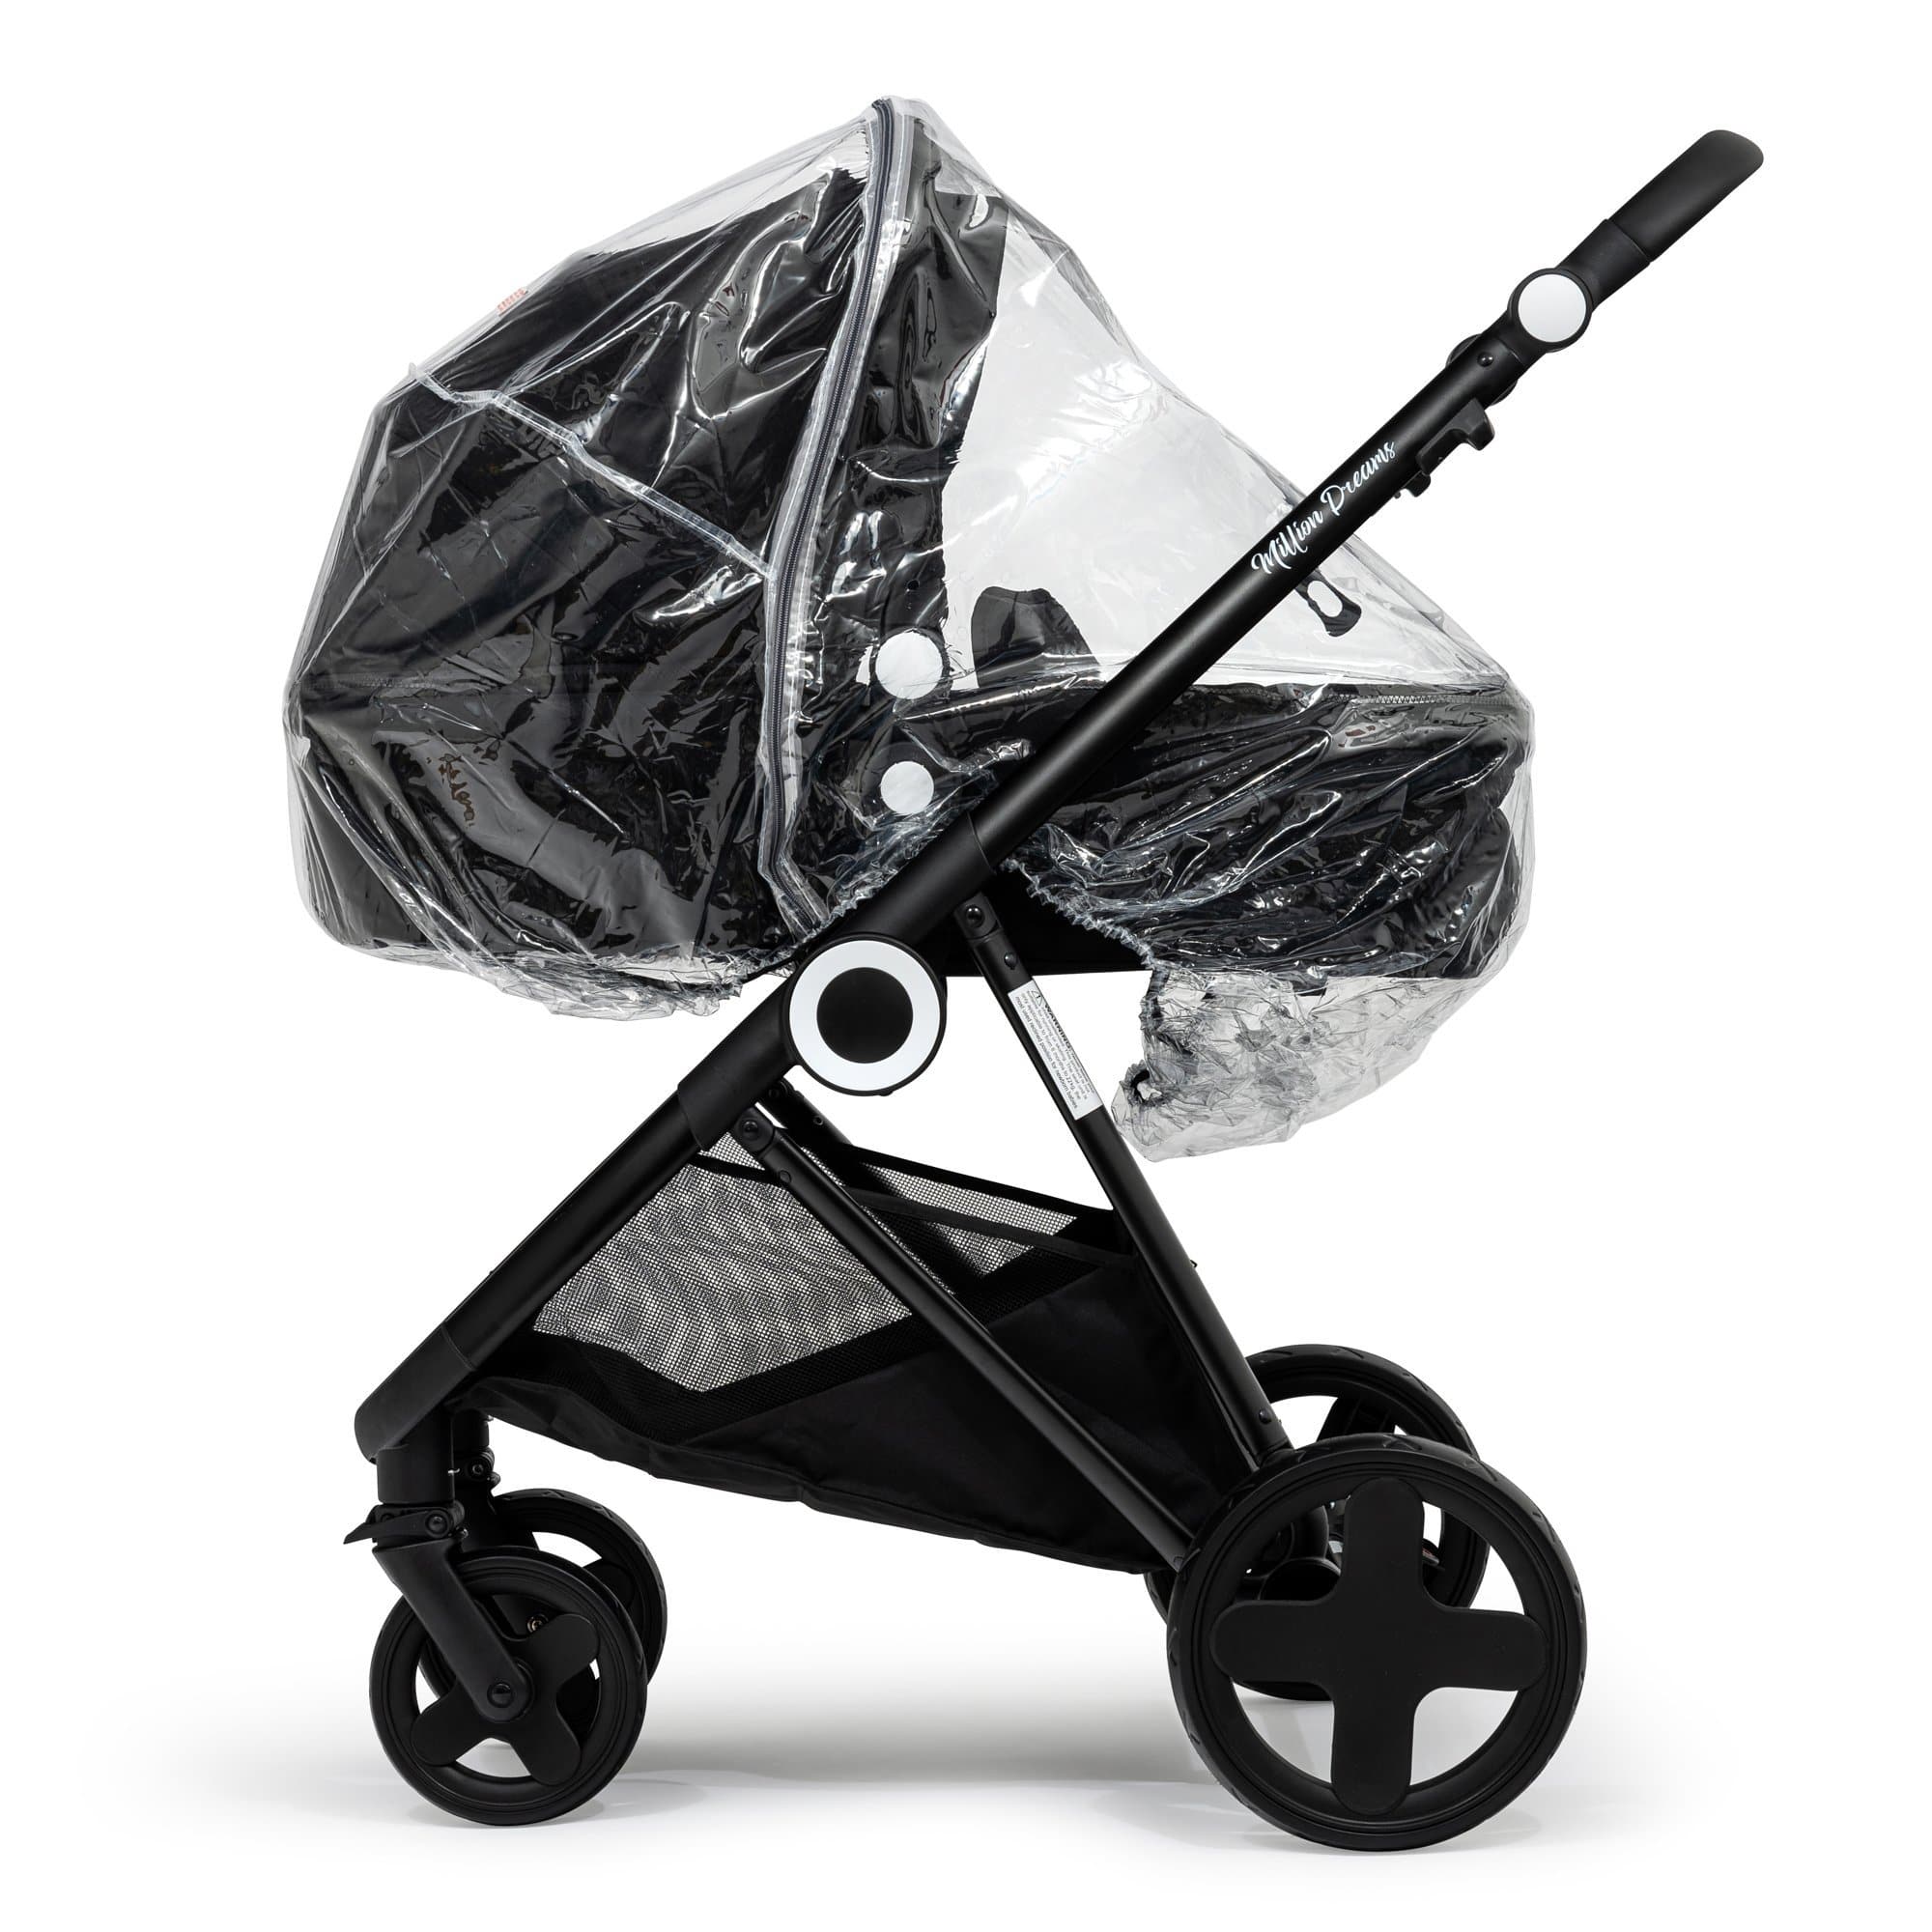 2 in 1 Rain Cover Compatible with Maclaren - Fits All Models - For Your Little One